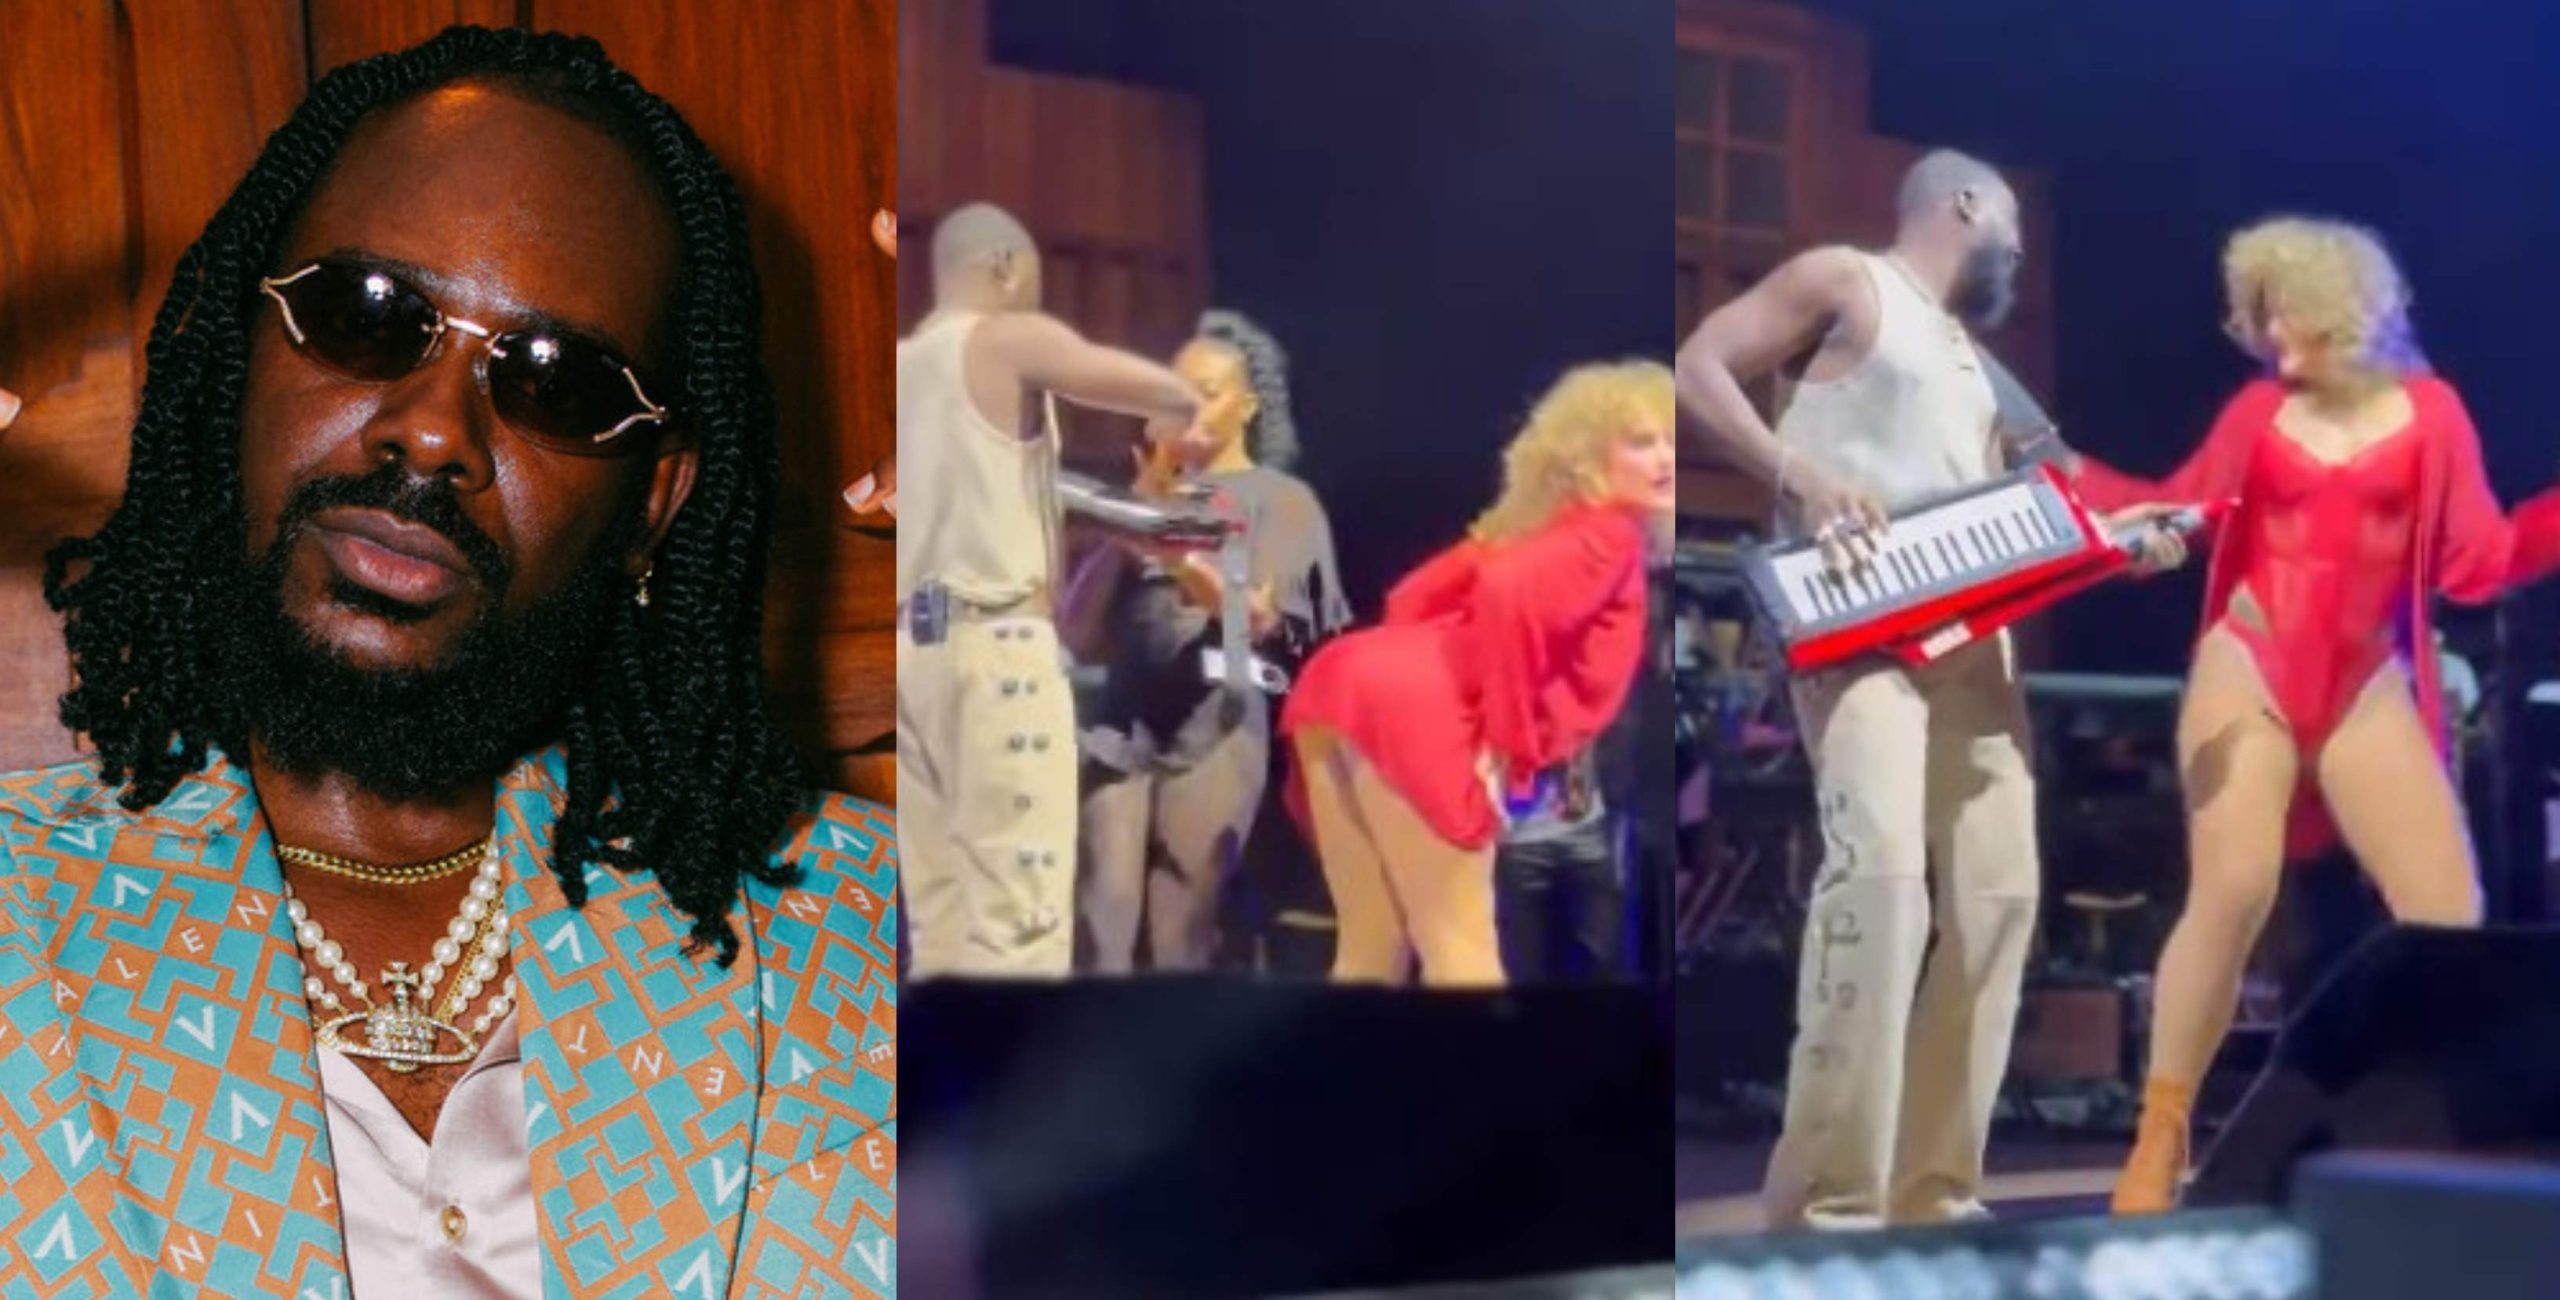 Reactions as dancer tries to rock singer Adekunle Gold while performing on stage at OVO arena in London